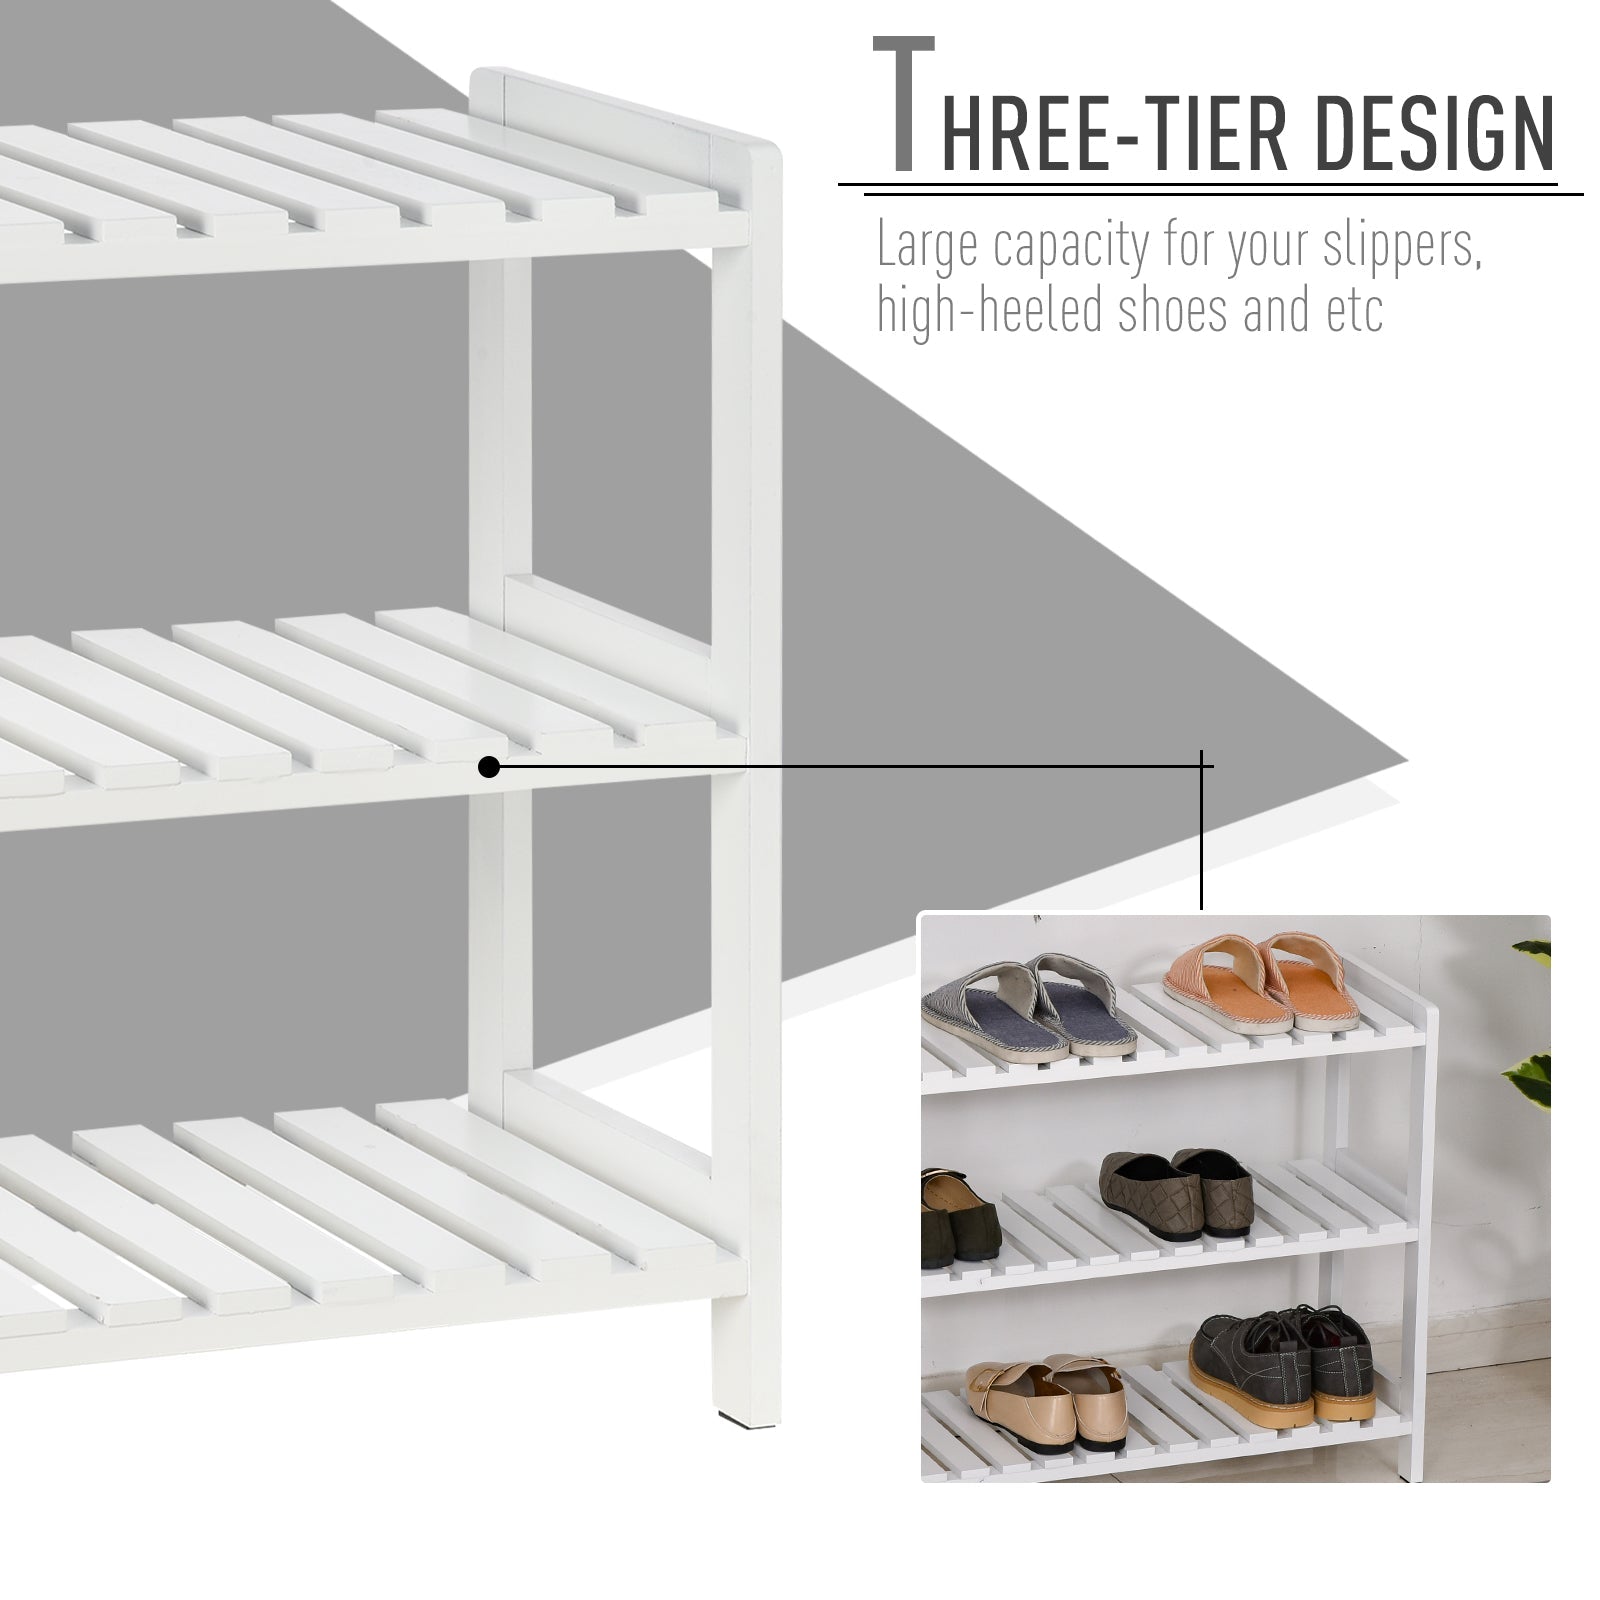 3-Tier Shoe Rack Wood Frame Slatted Shelves Spacious Open Hygienic Storage Home Hallway Furniture Family Guests 70L x 26W x 57.5H cm - White-4